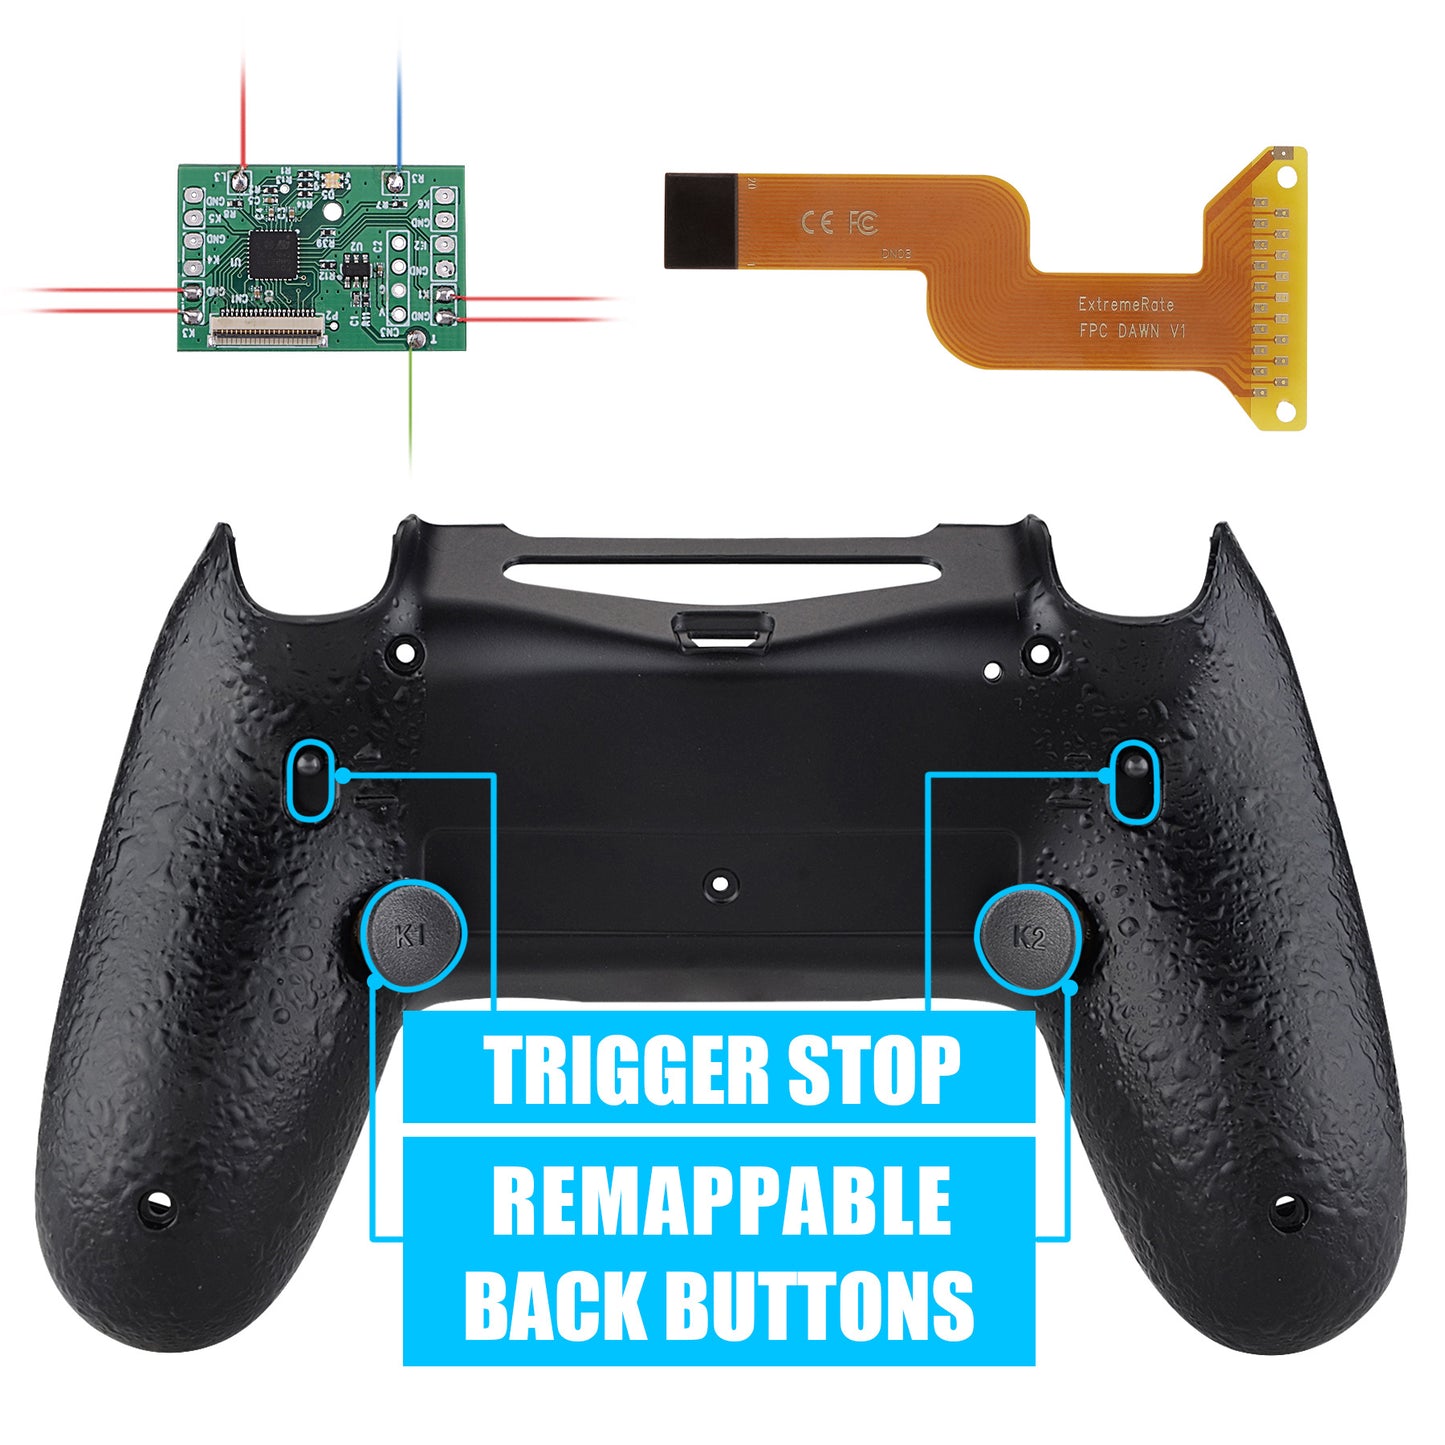 Textured Black Dawn 2.0 FlashShot Trigger Stop Remap Kit for ps4 CUH-ZCT2 Controller, Part & Back Shell & 2 Back Buttons & 2 Trigger Lock for ps4 Controller JDM 040/050/055 - P4QS001 eXtremeRate